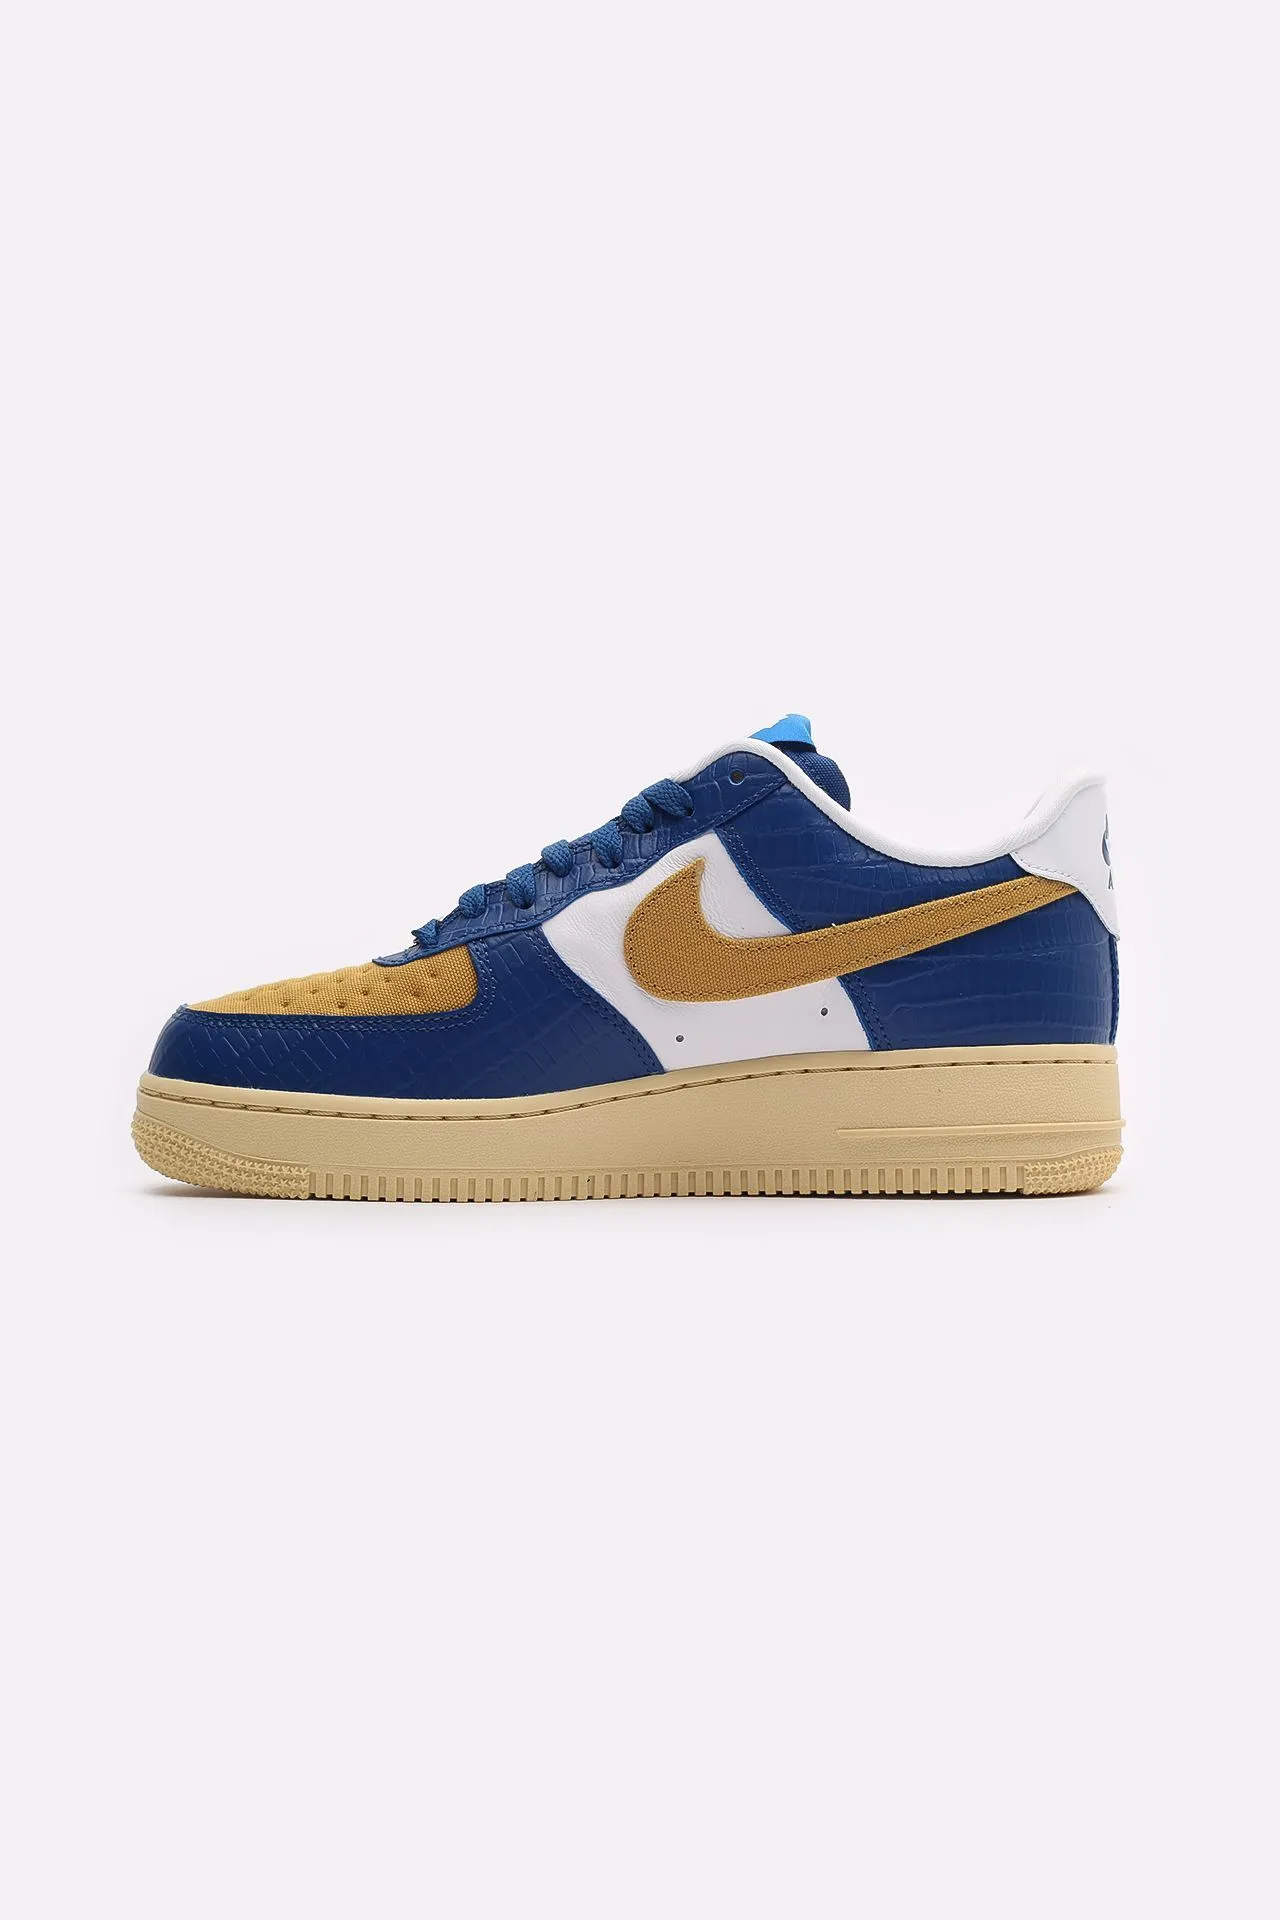 undefeated nike air force 1 low sp